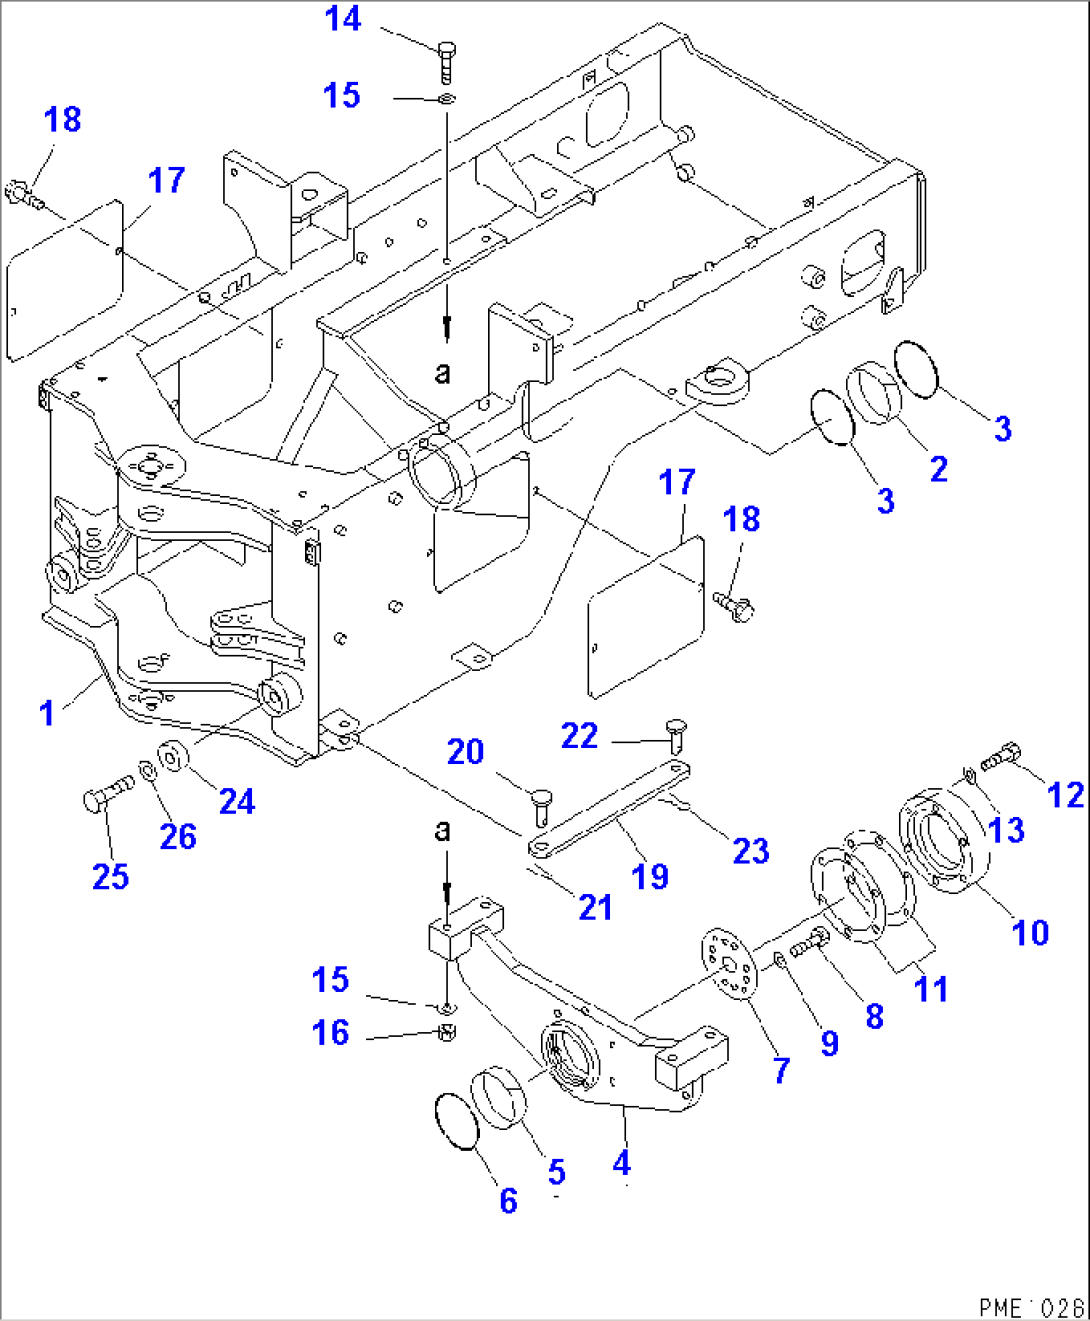 REAR FRAME (WITH ADDITIONAL COUNTER WEIGHT)(#50001-)